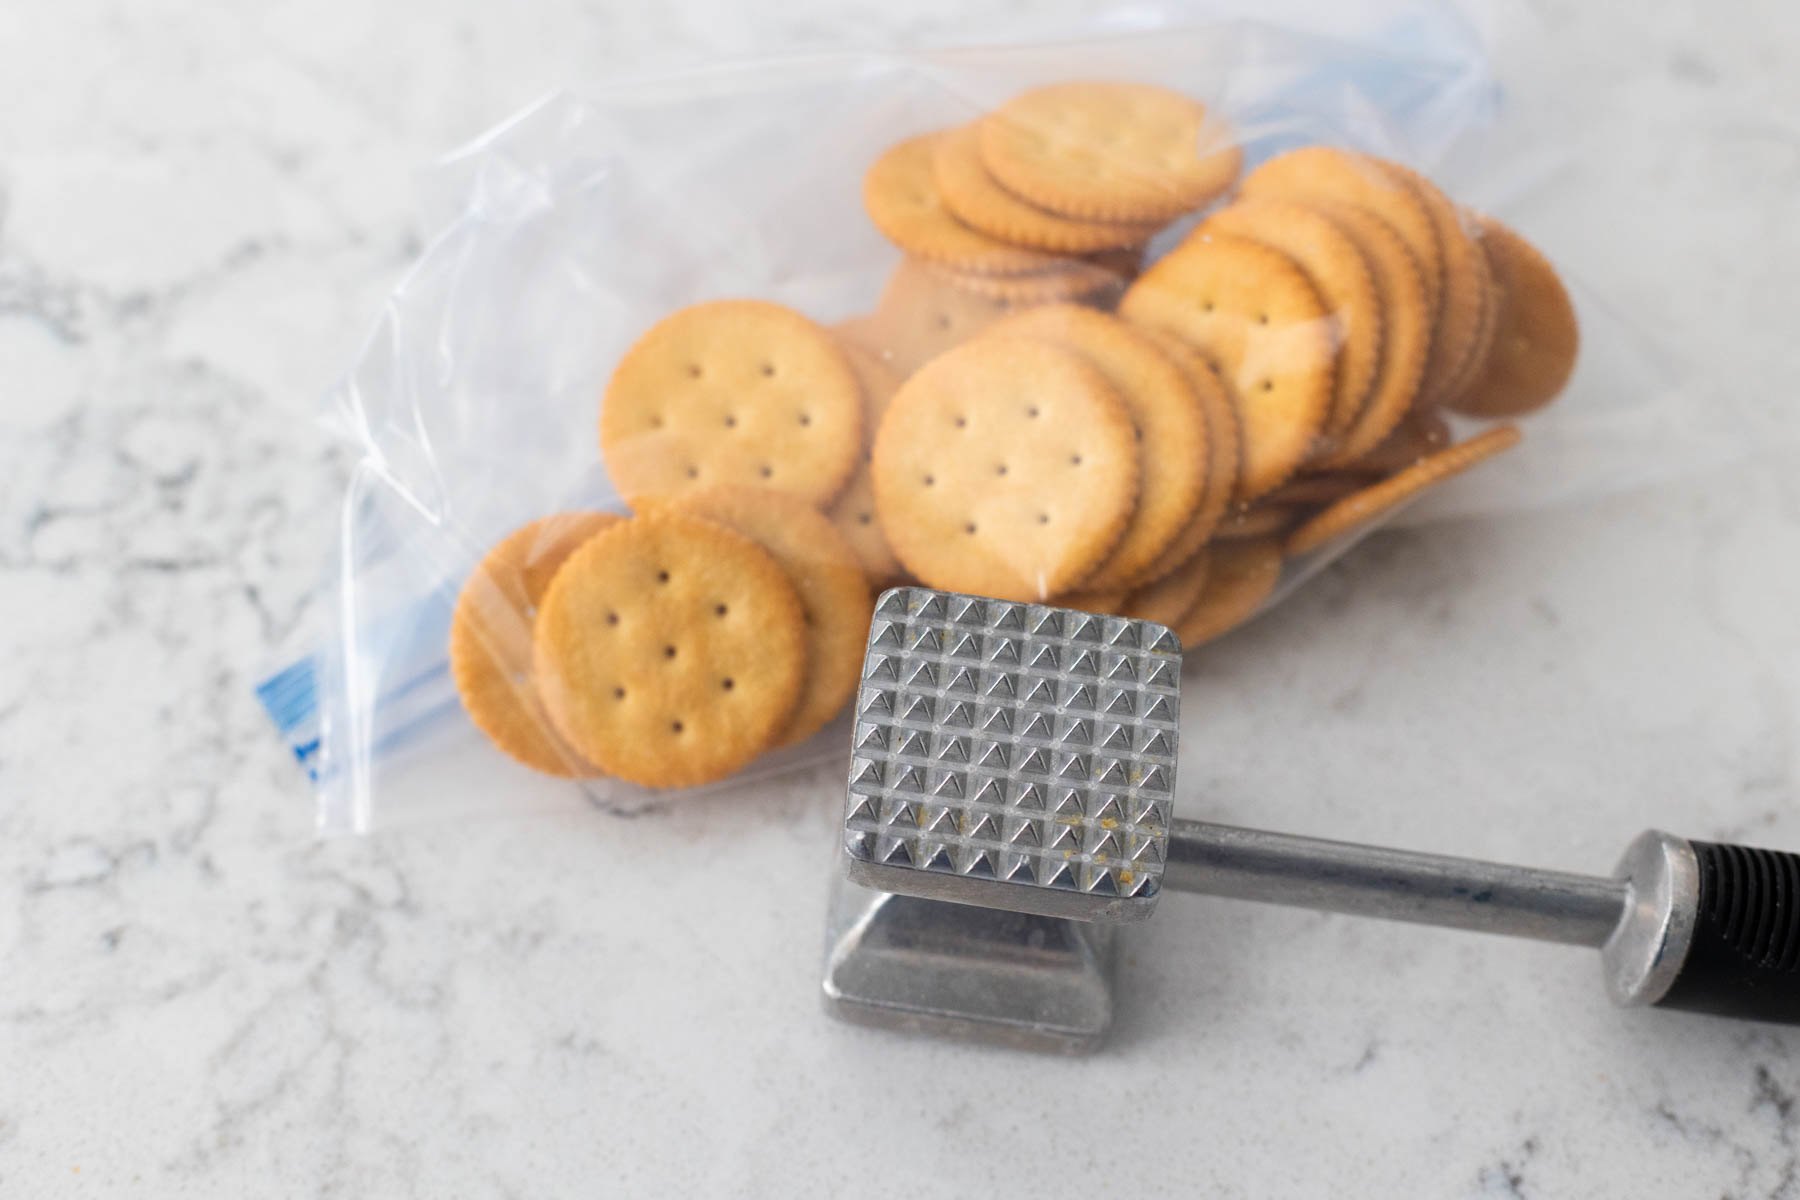 The butter crackers are in a ziptop bag.